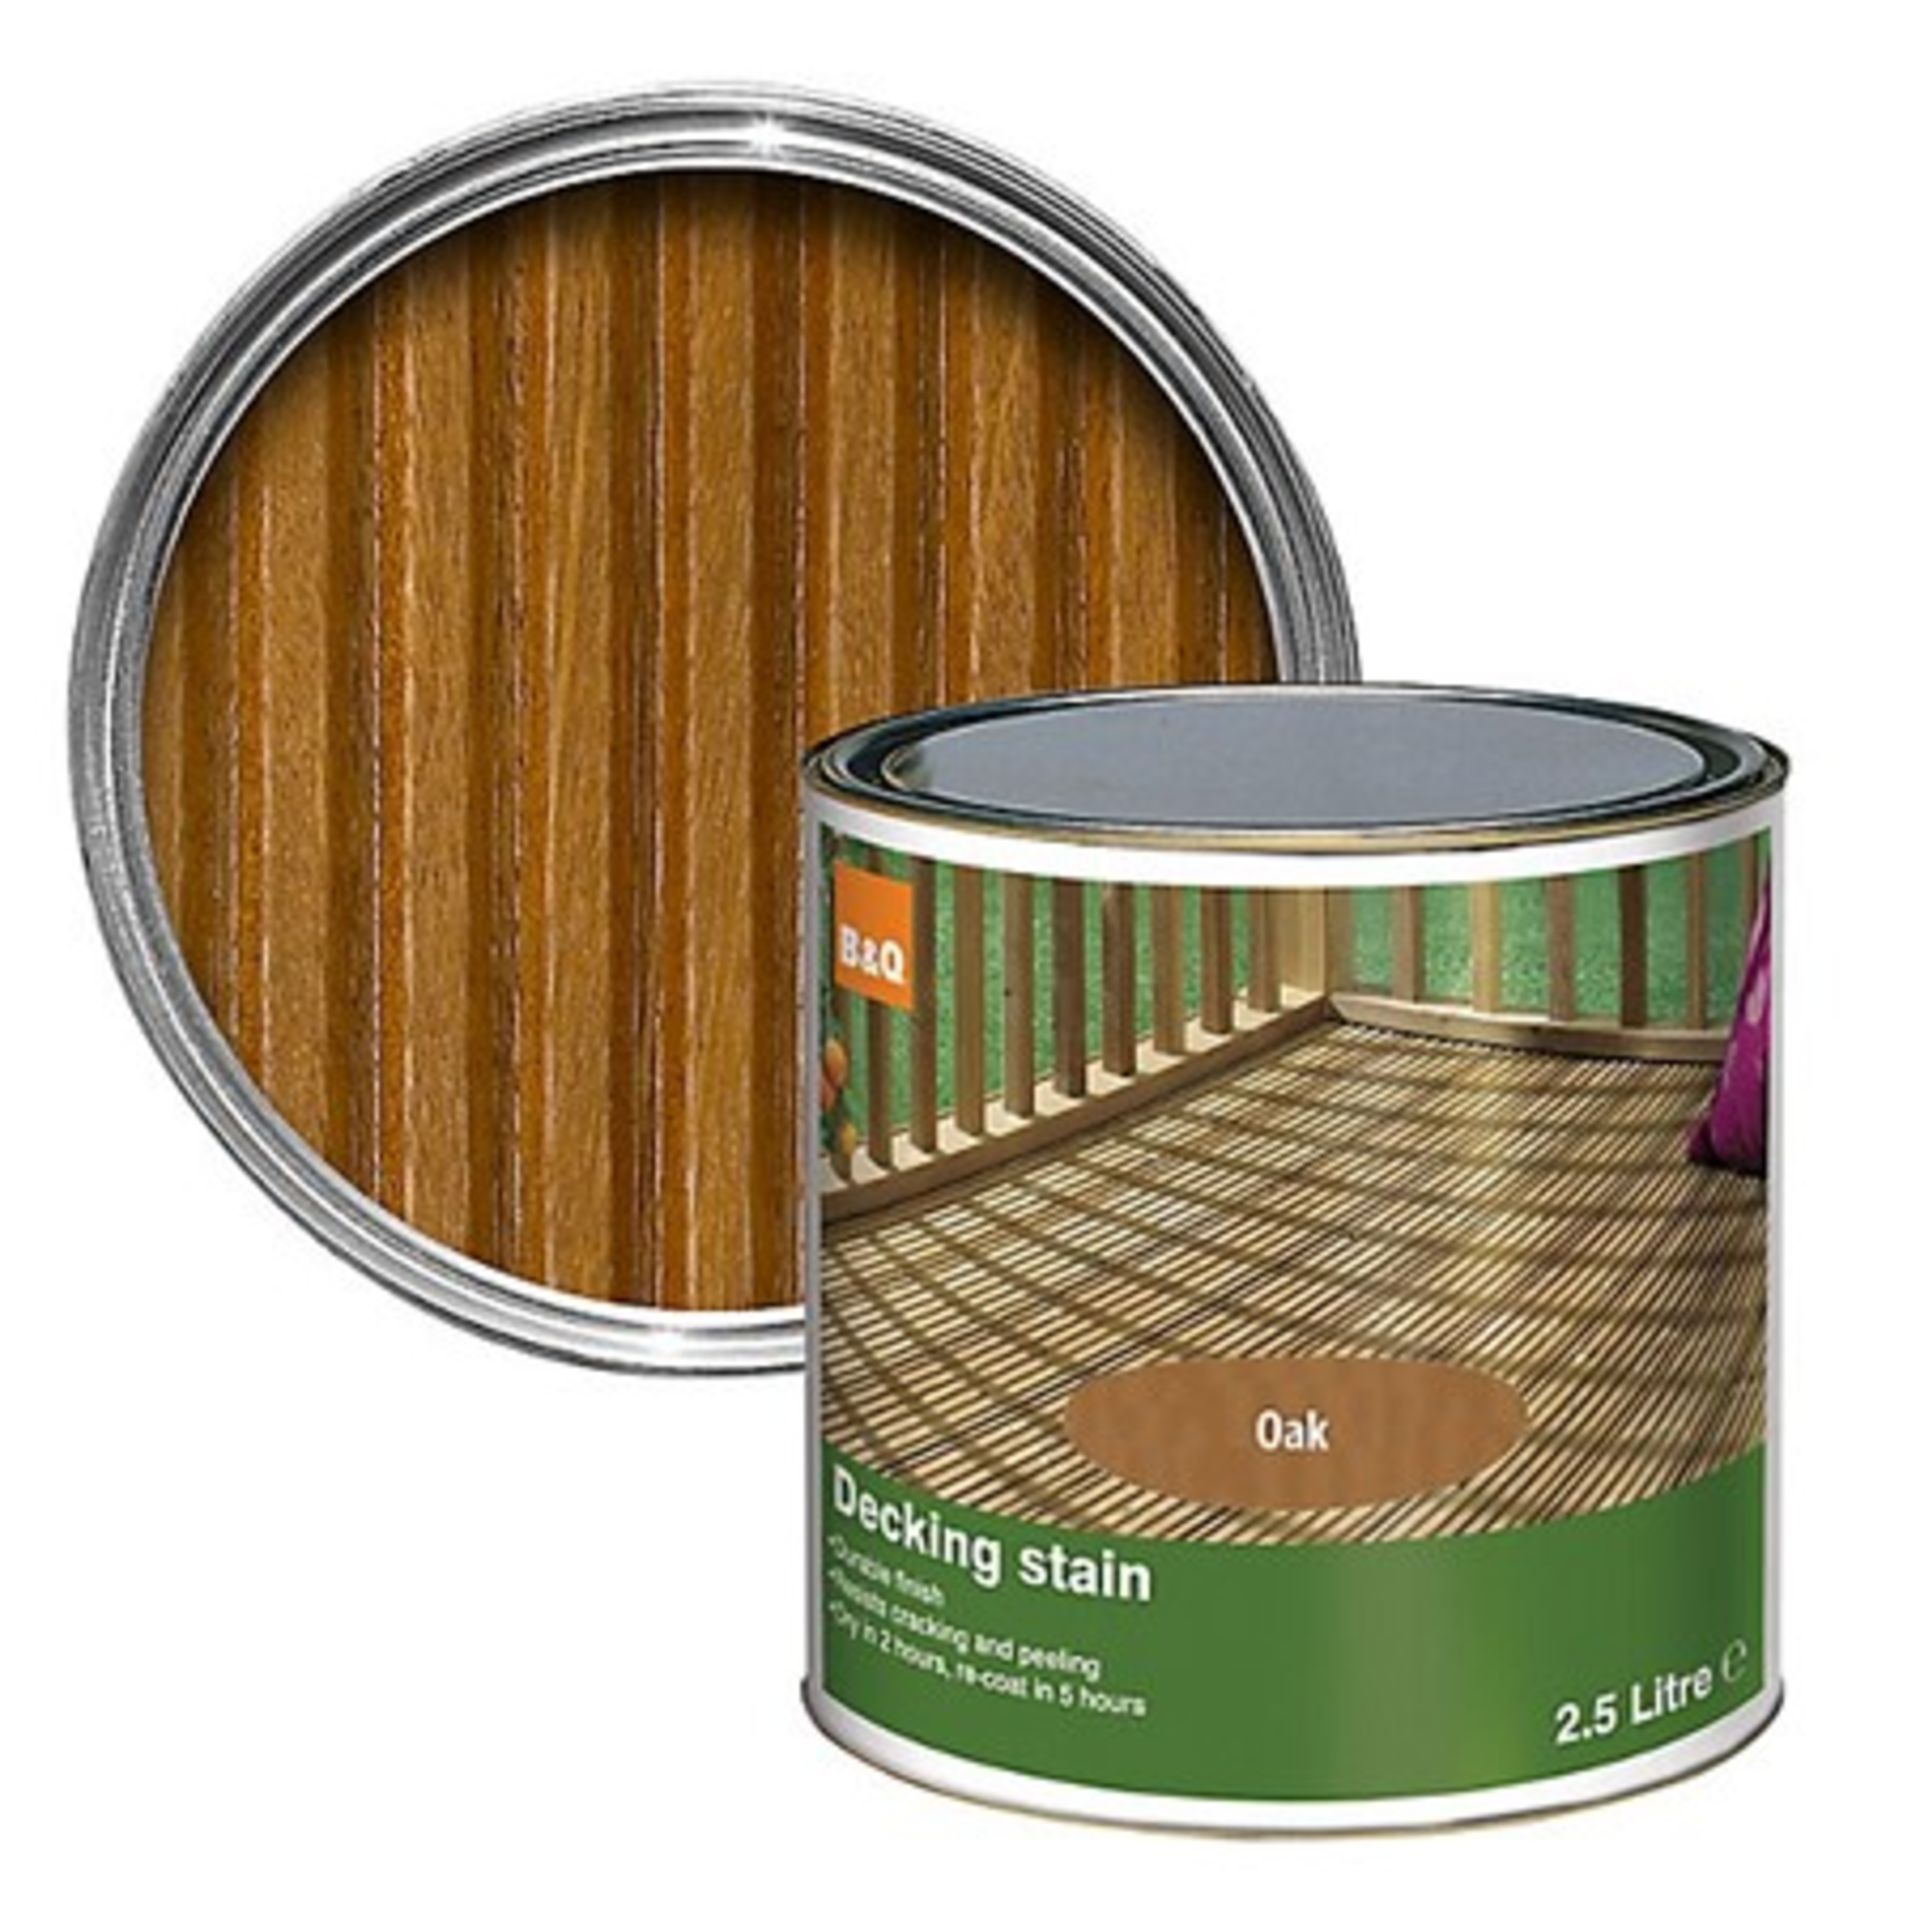 (REF2078828) 1 Pallet of Customer Returns - Retail value at new £709.36. To include: RONSEAL WOOD - Image 3 of 3